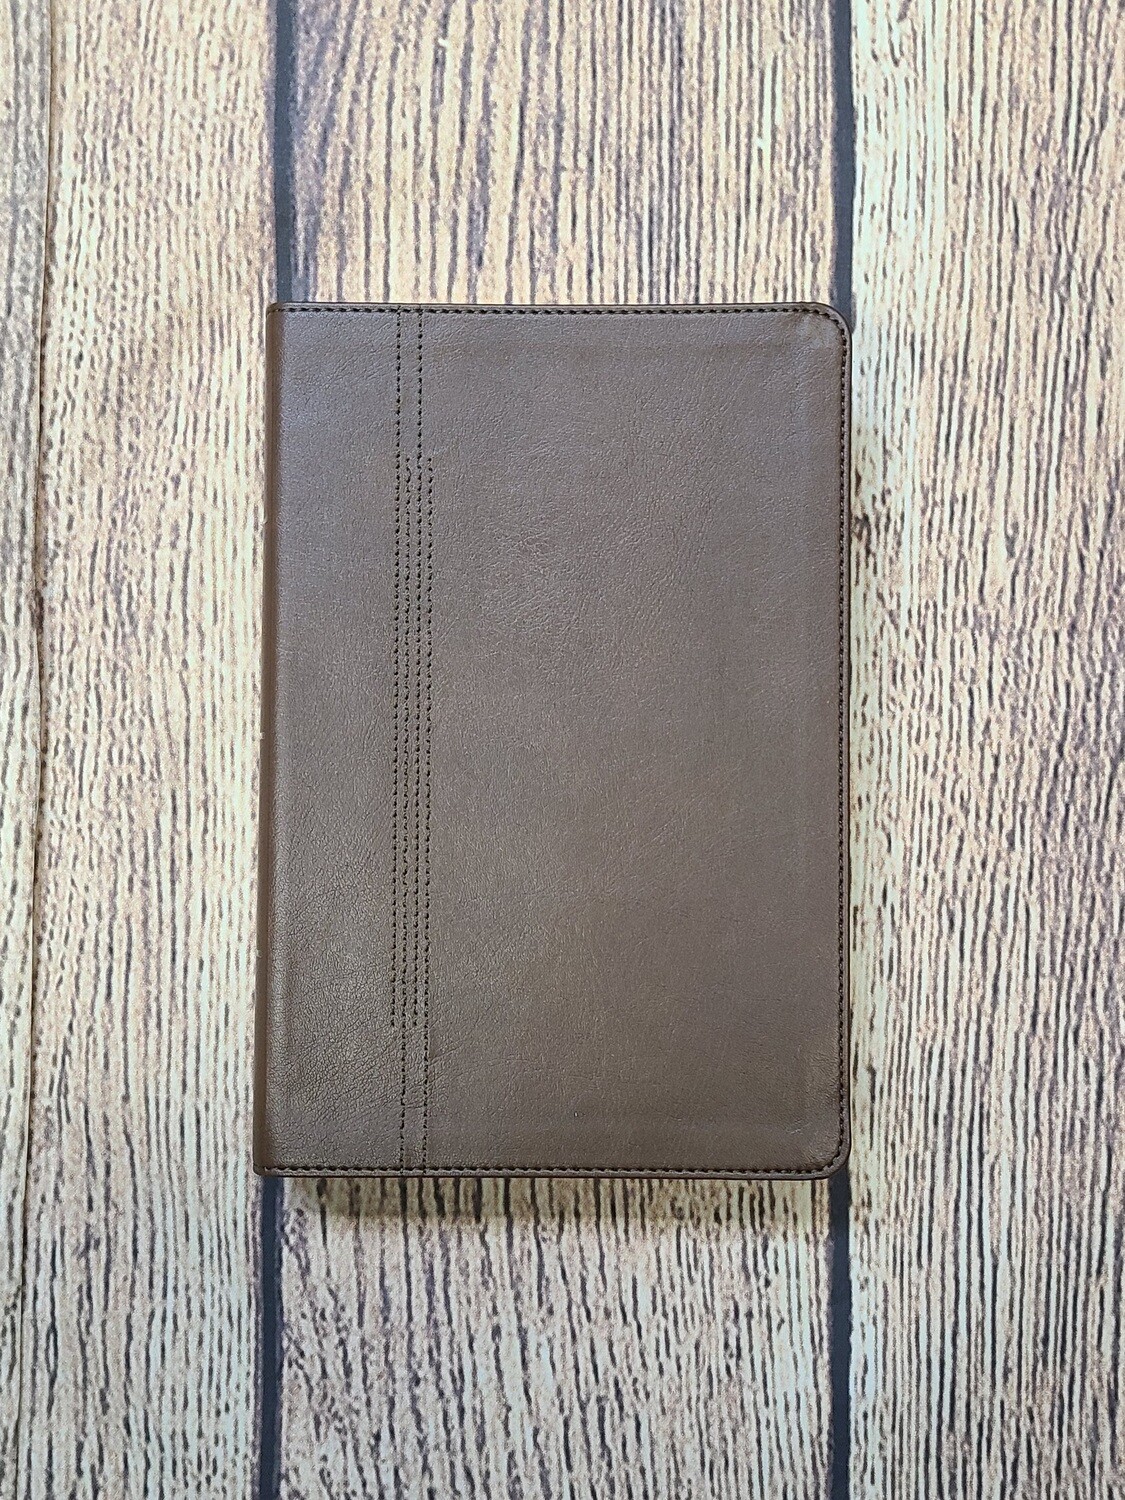 CSB Restoration Bible - Brown Leathertouch